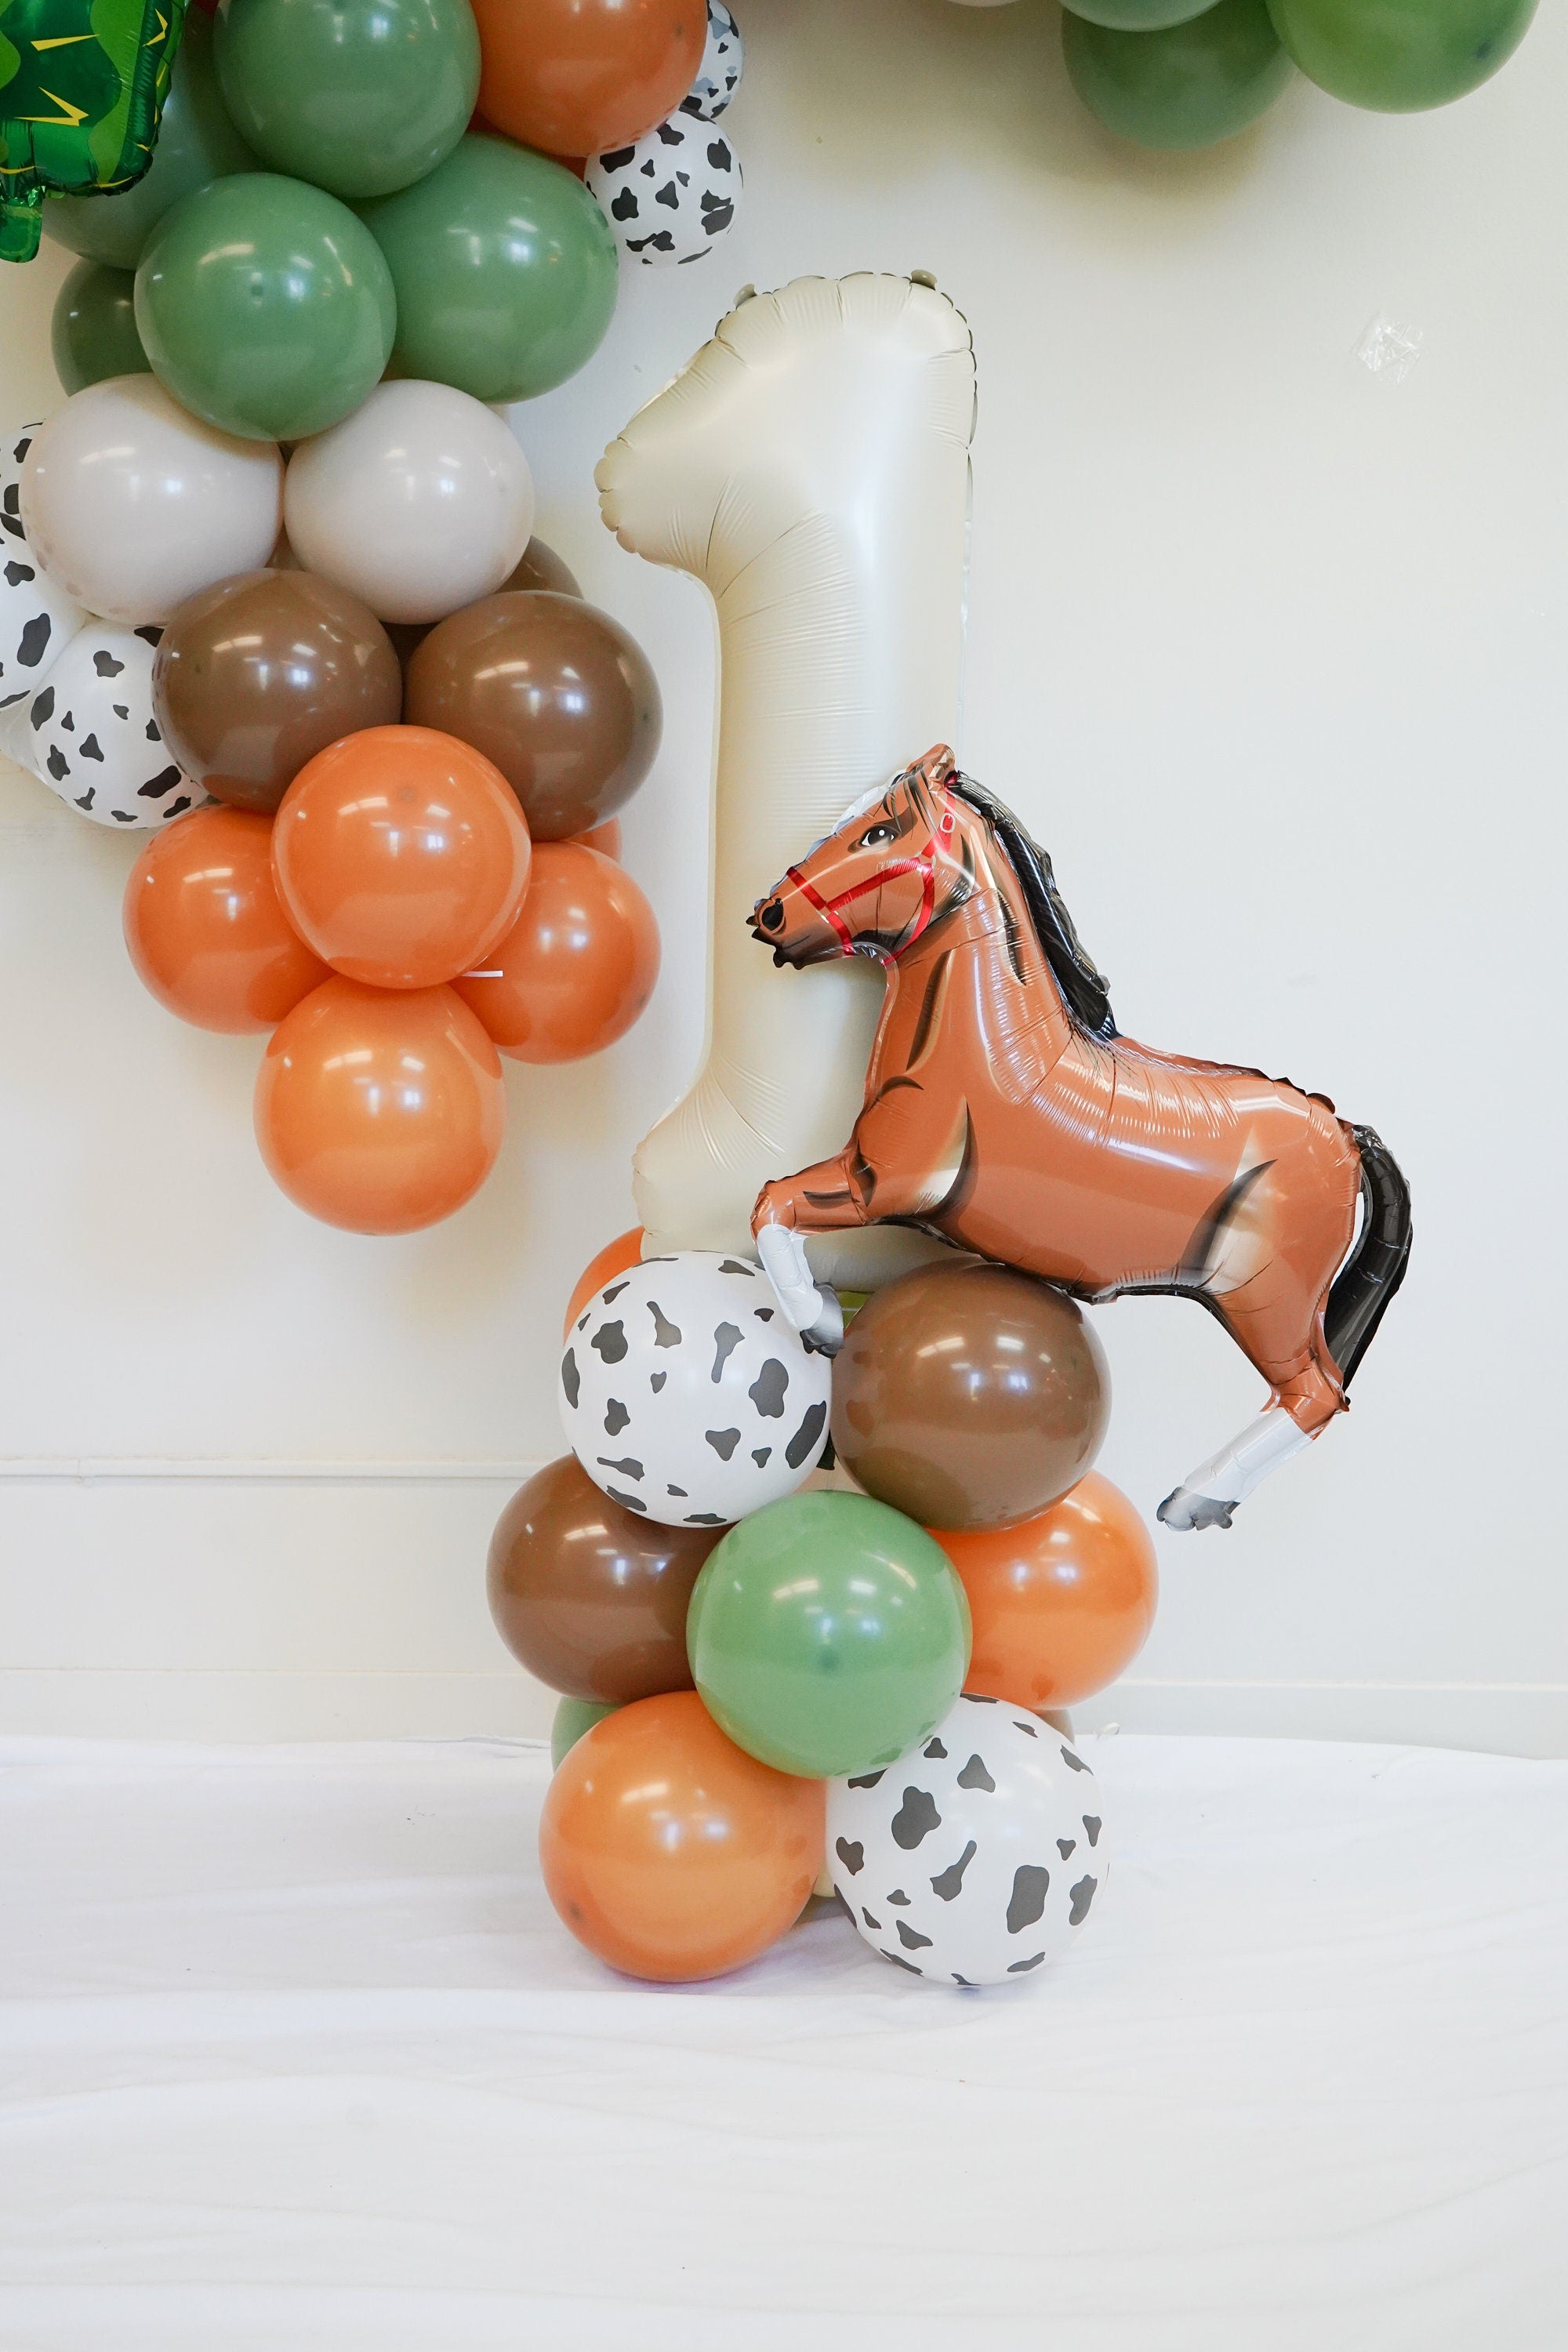 My First Rodeo Balloon Column  | Wild West birthday party | Western Cowboy theme balloon | 1st Rodeo Birthday Western themed party decors